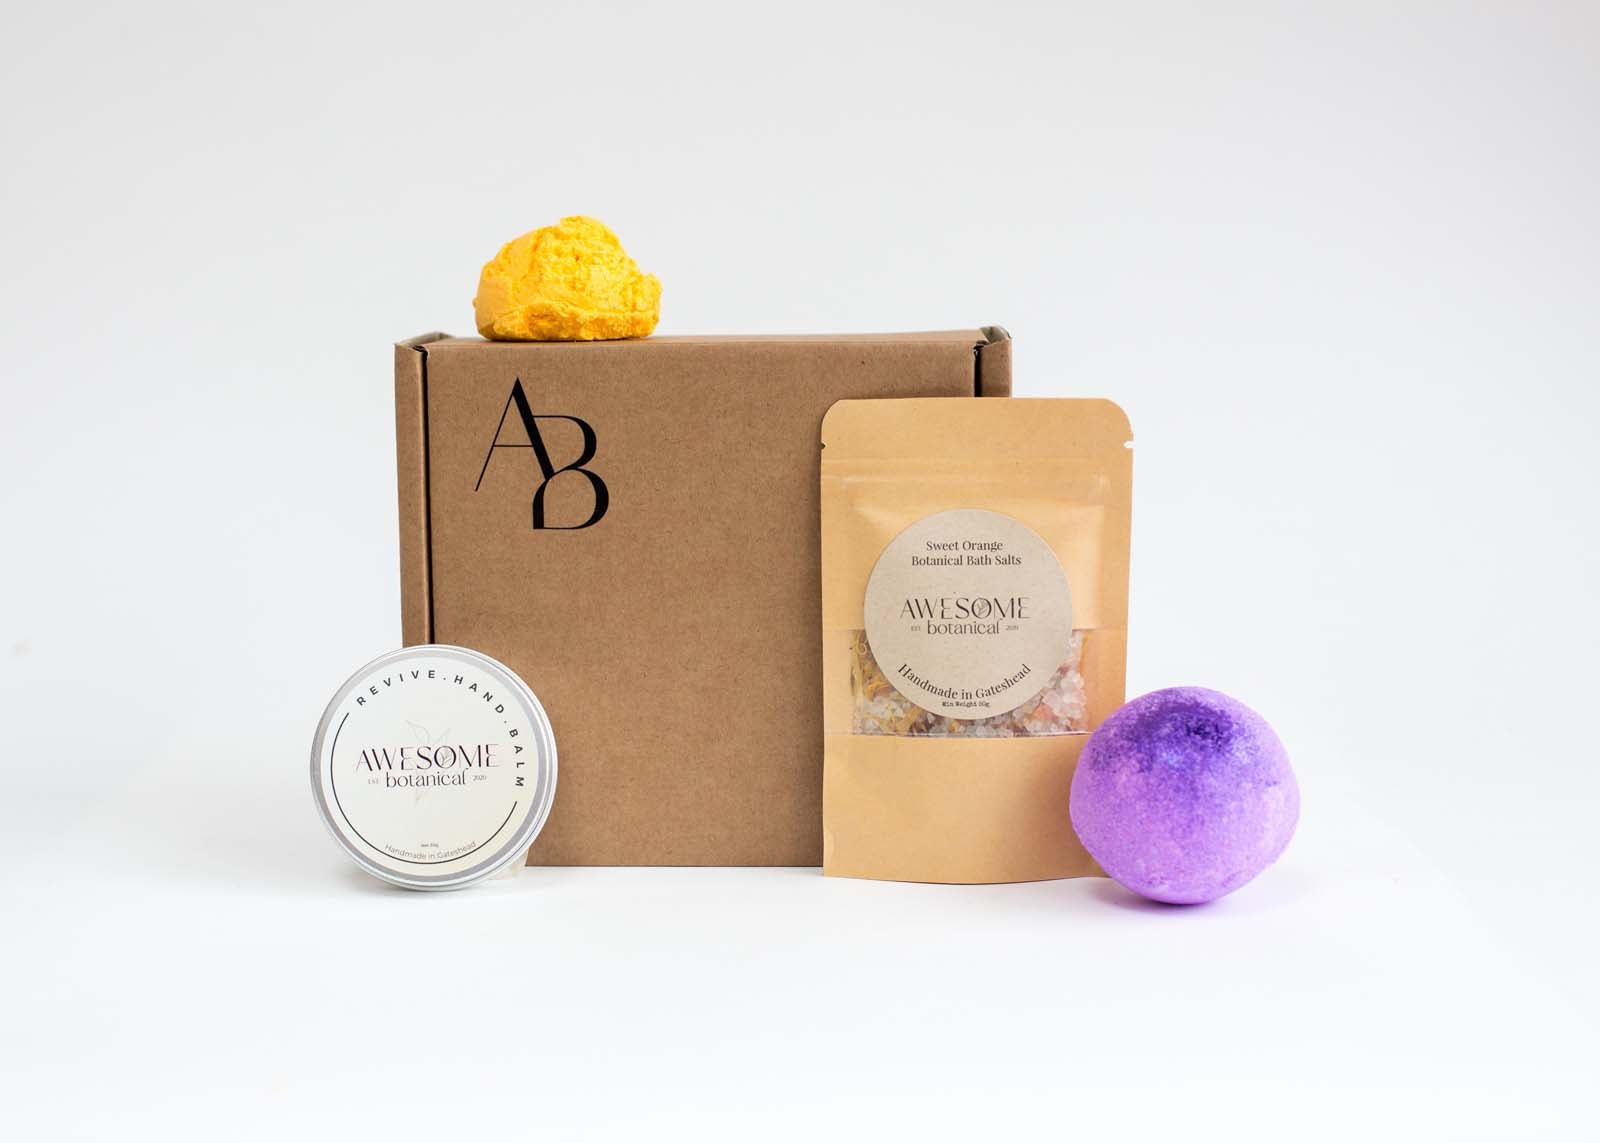 Awesome Botanical Monthly subscription box on white background with 4 products in front of the kraft box